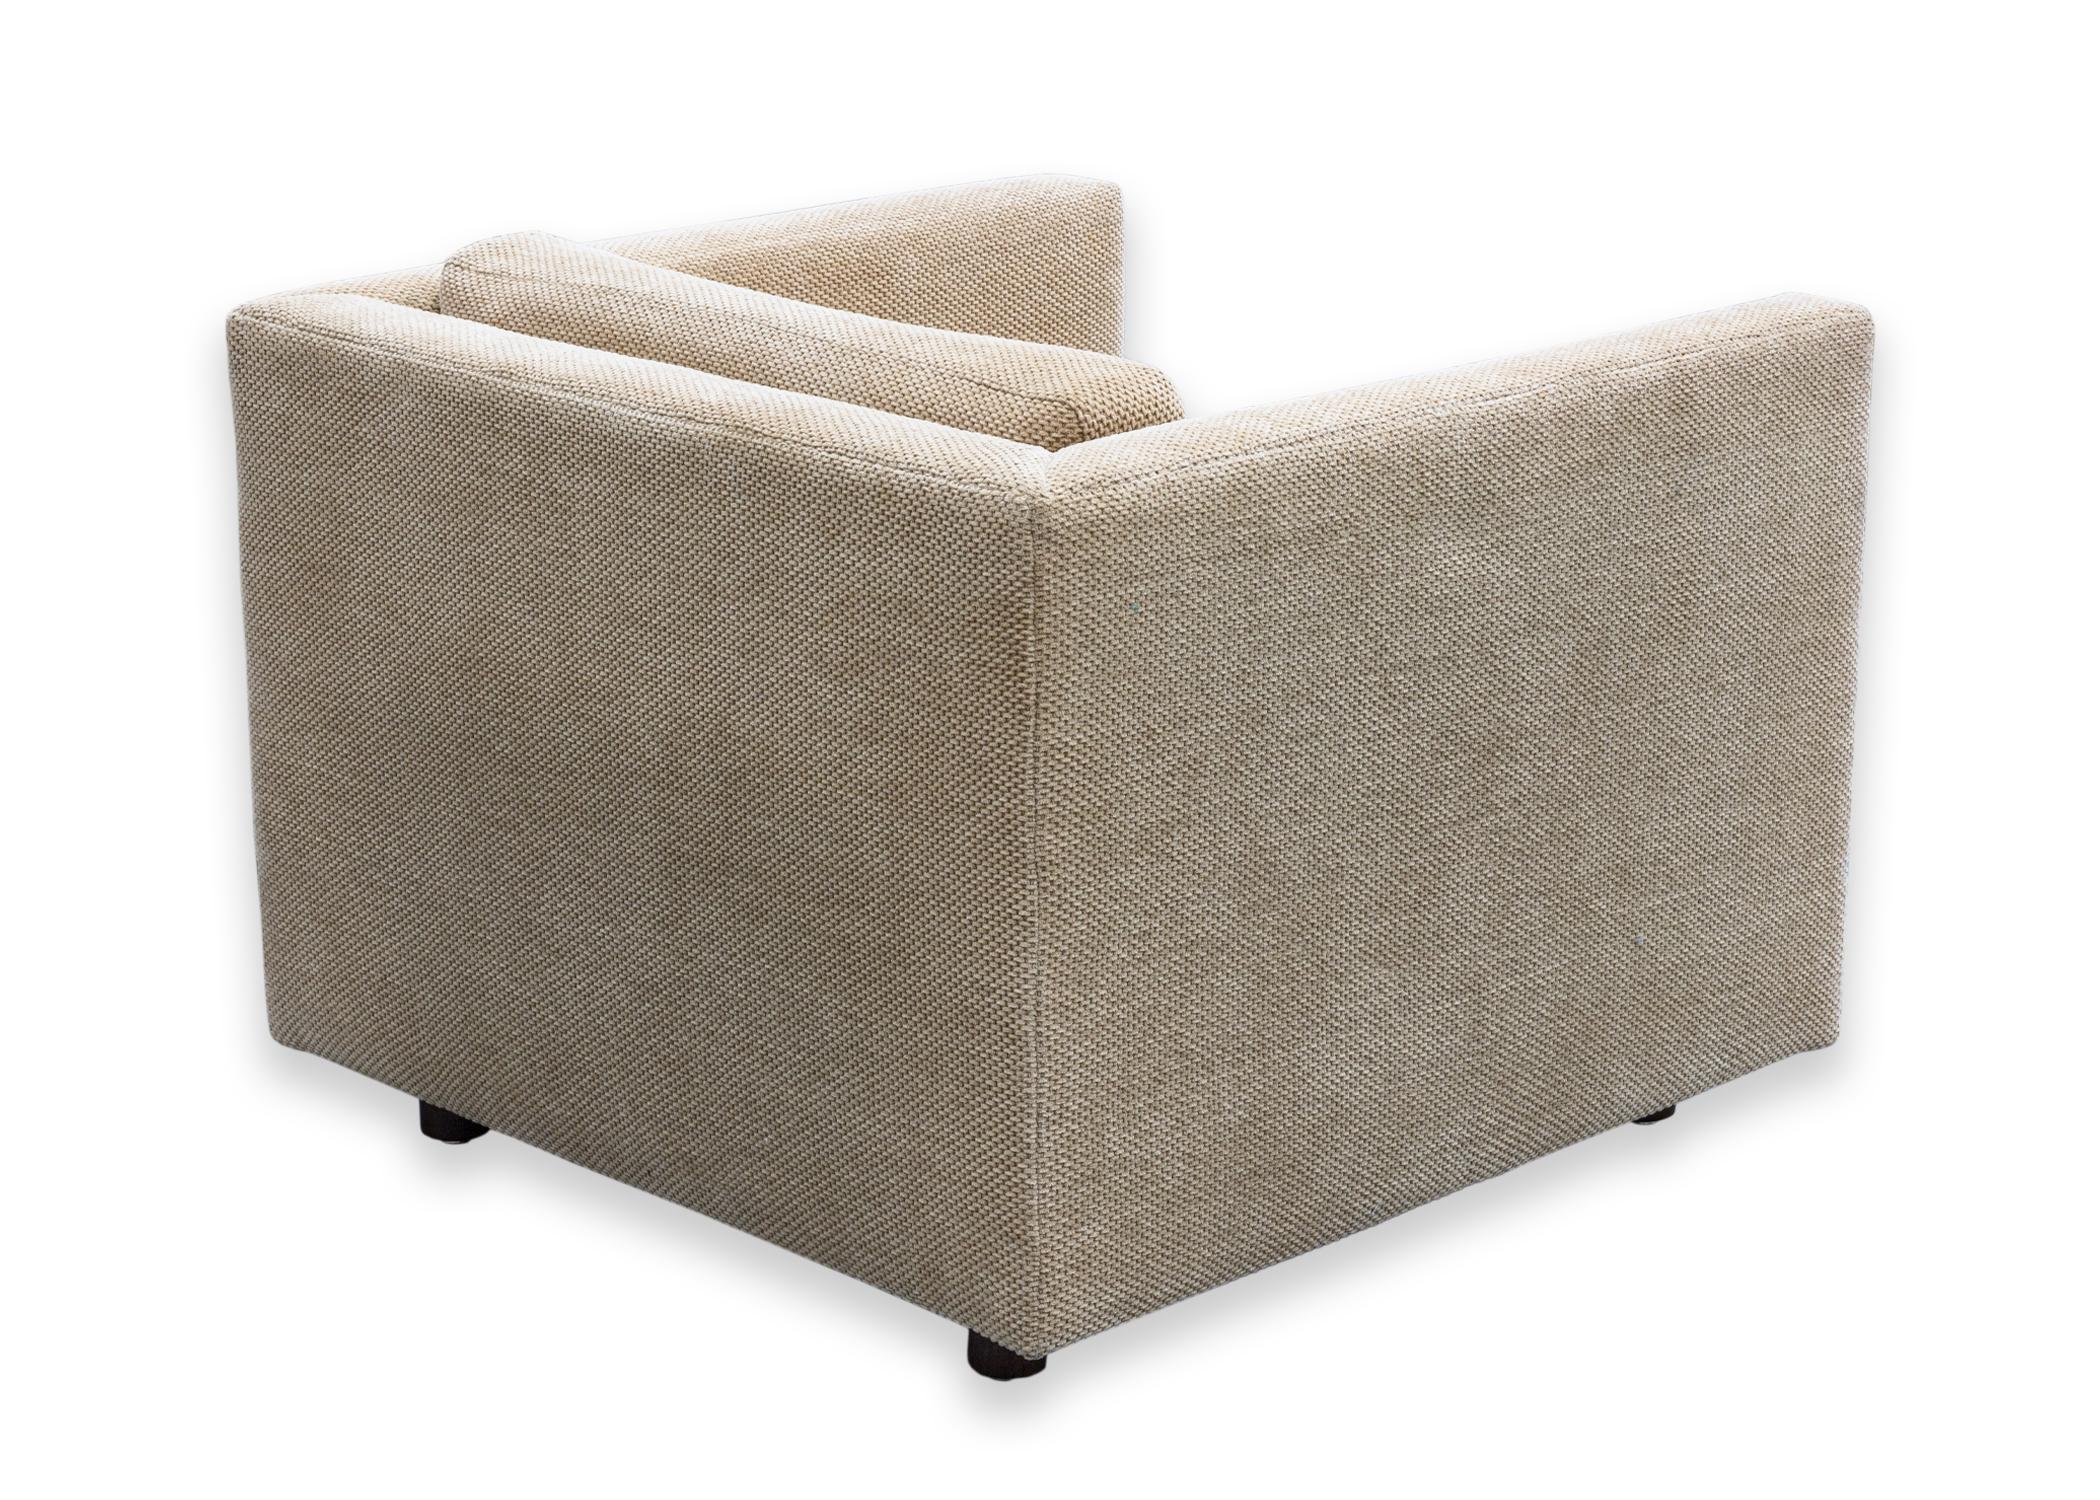 Fabric Pair of Tan Brickell Cube Accent Lounge Chairs with Wooden Legs